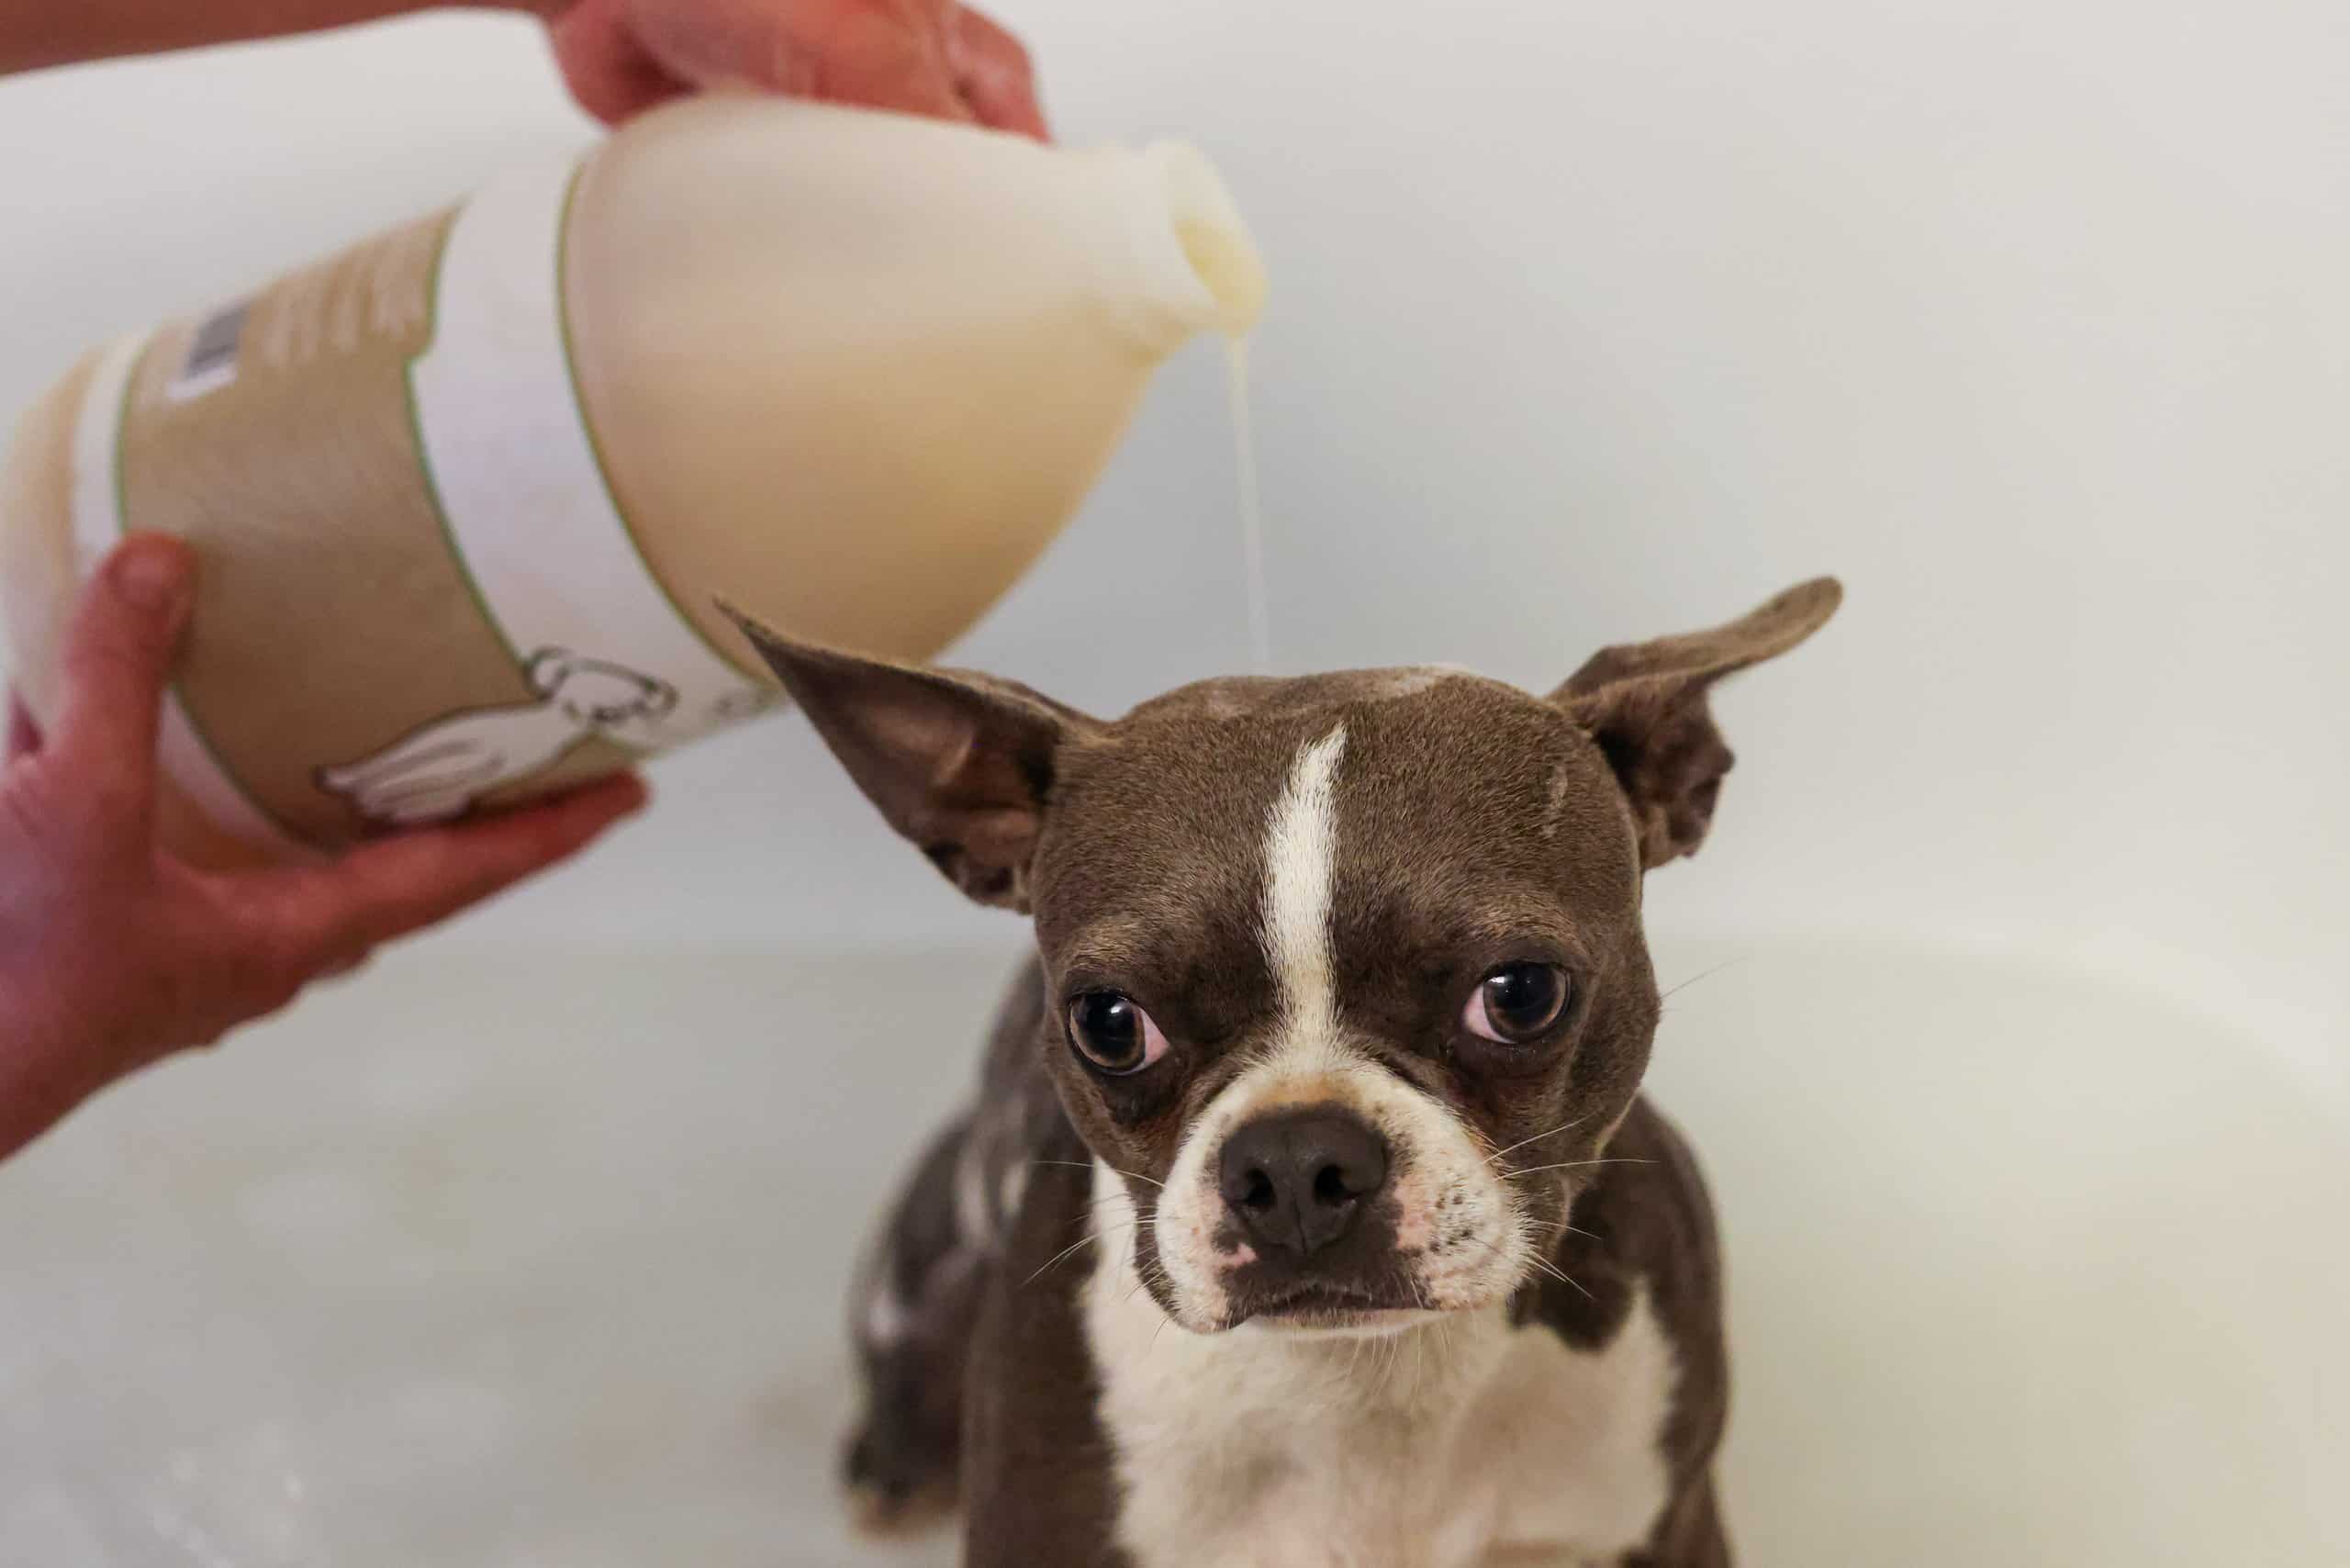 Lockeland, a Boston Terrier, gets a dog shampooing with WAHL Dry Skin and Itch Relief Shampoo.